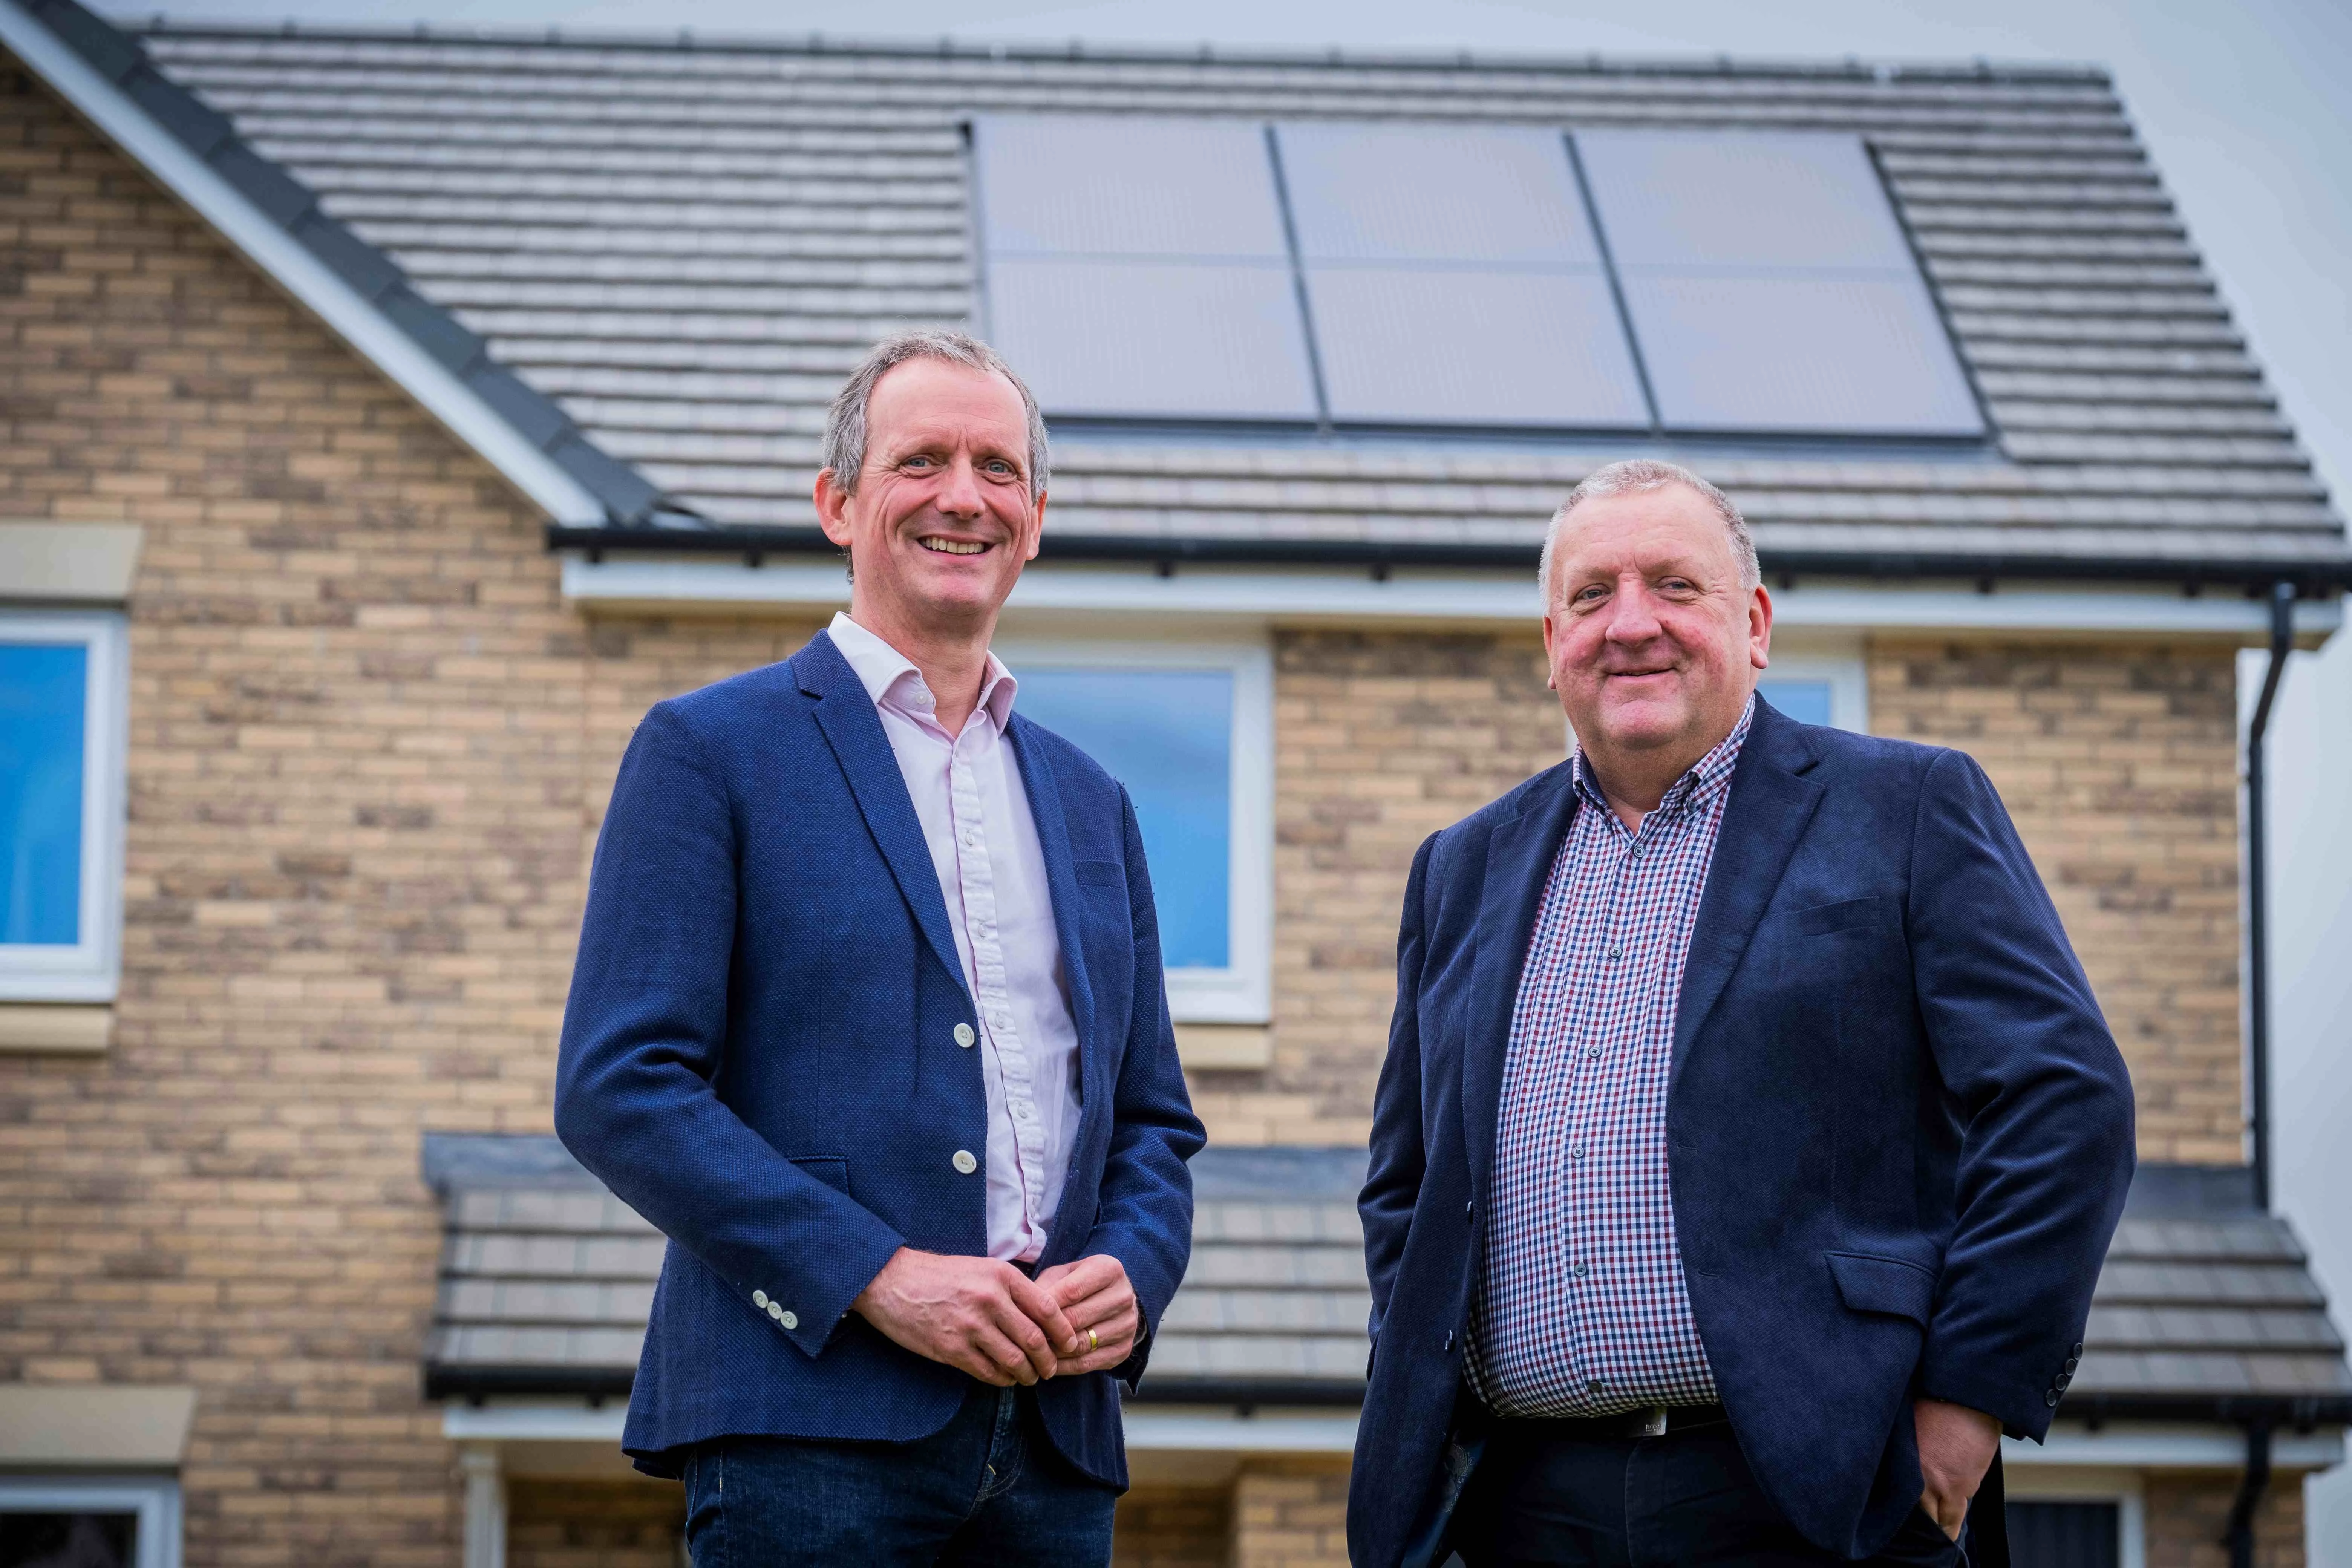 Robin Peters, CEO of Snugg and Paul Denton, CEO of Scottish Building Society outside an energy efficient property in west of Edinburgh